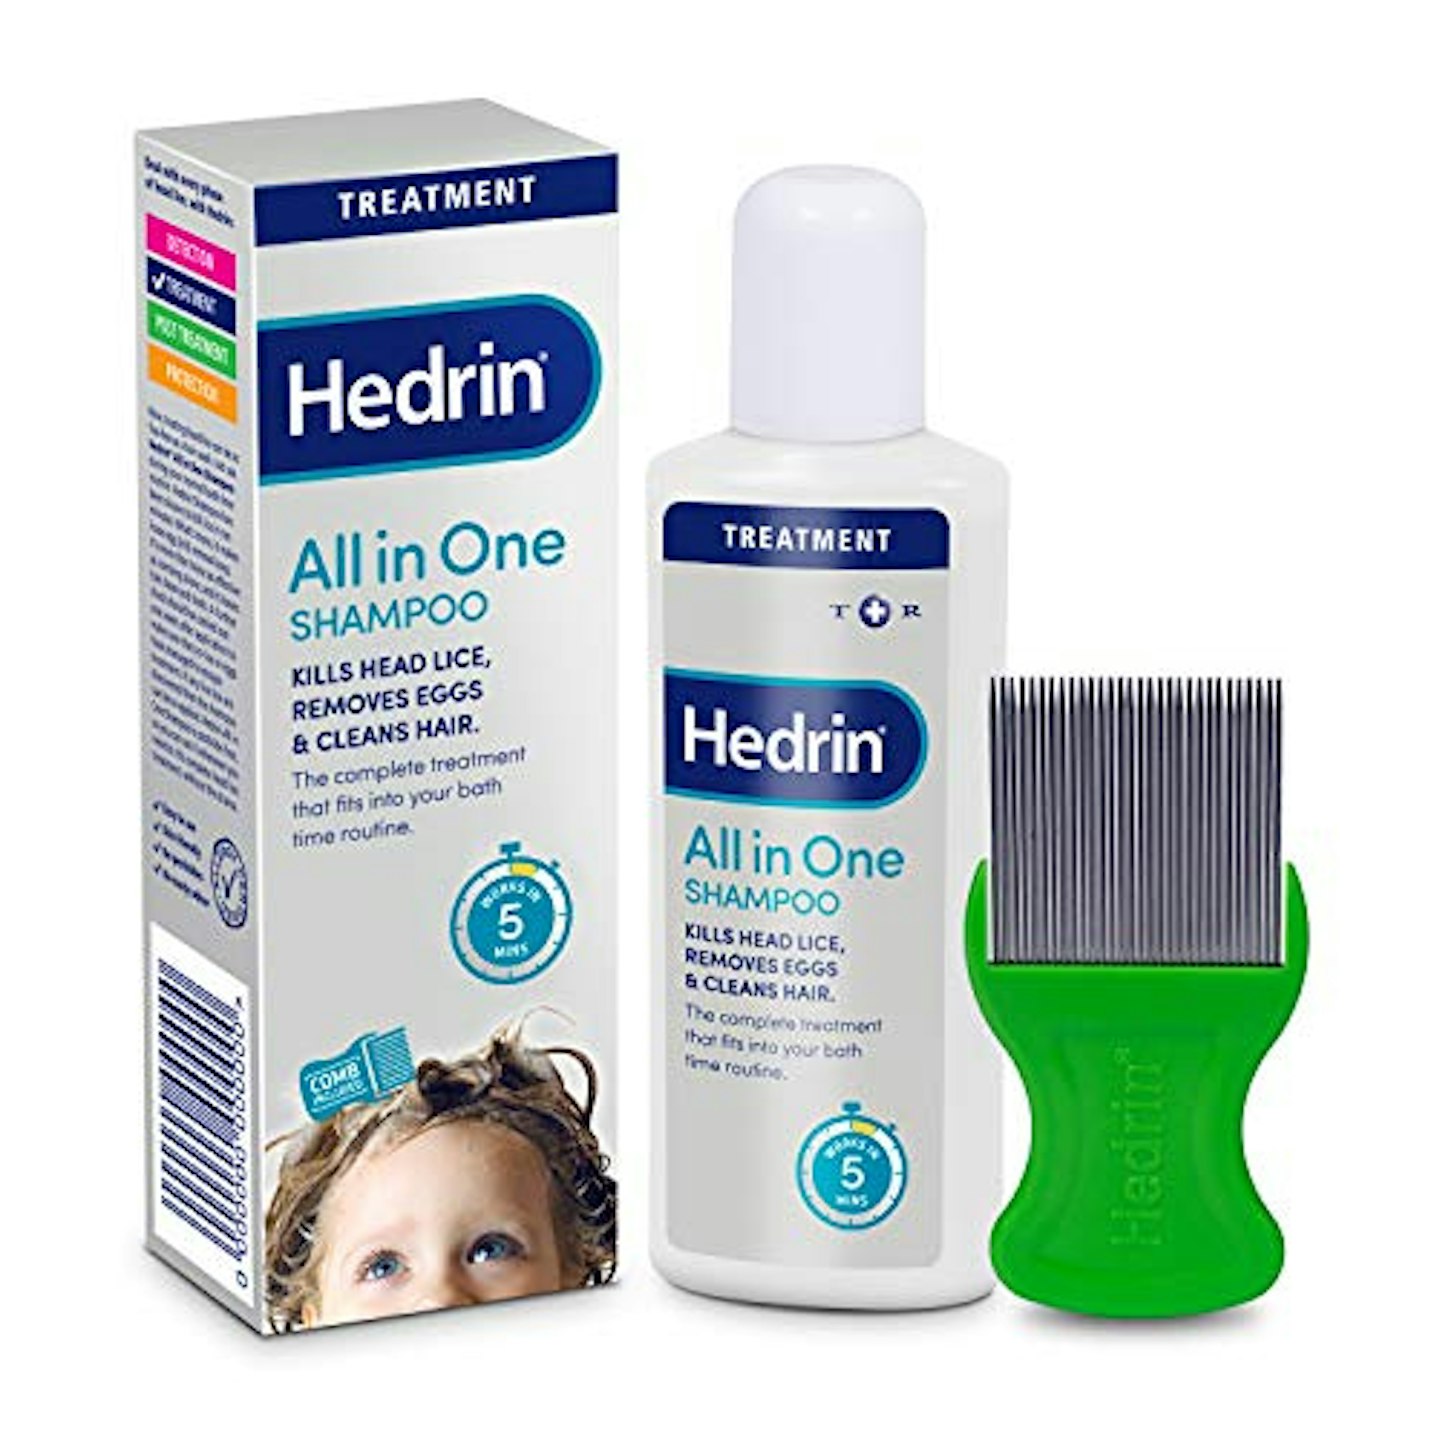 Hedrin All-in-One Shampoo, Head Lice Treatment with Nit Comb Included